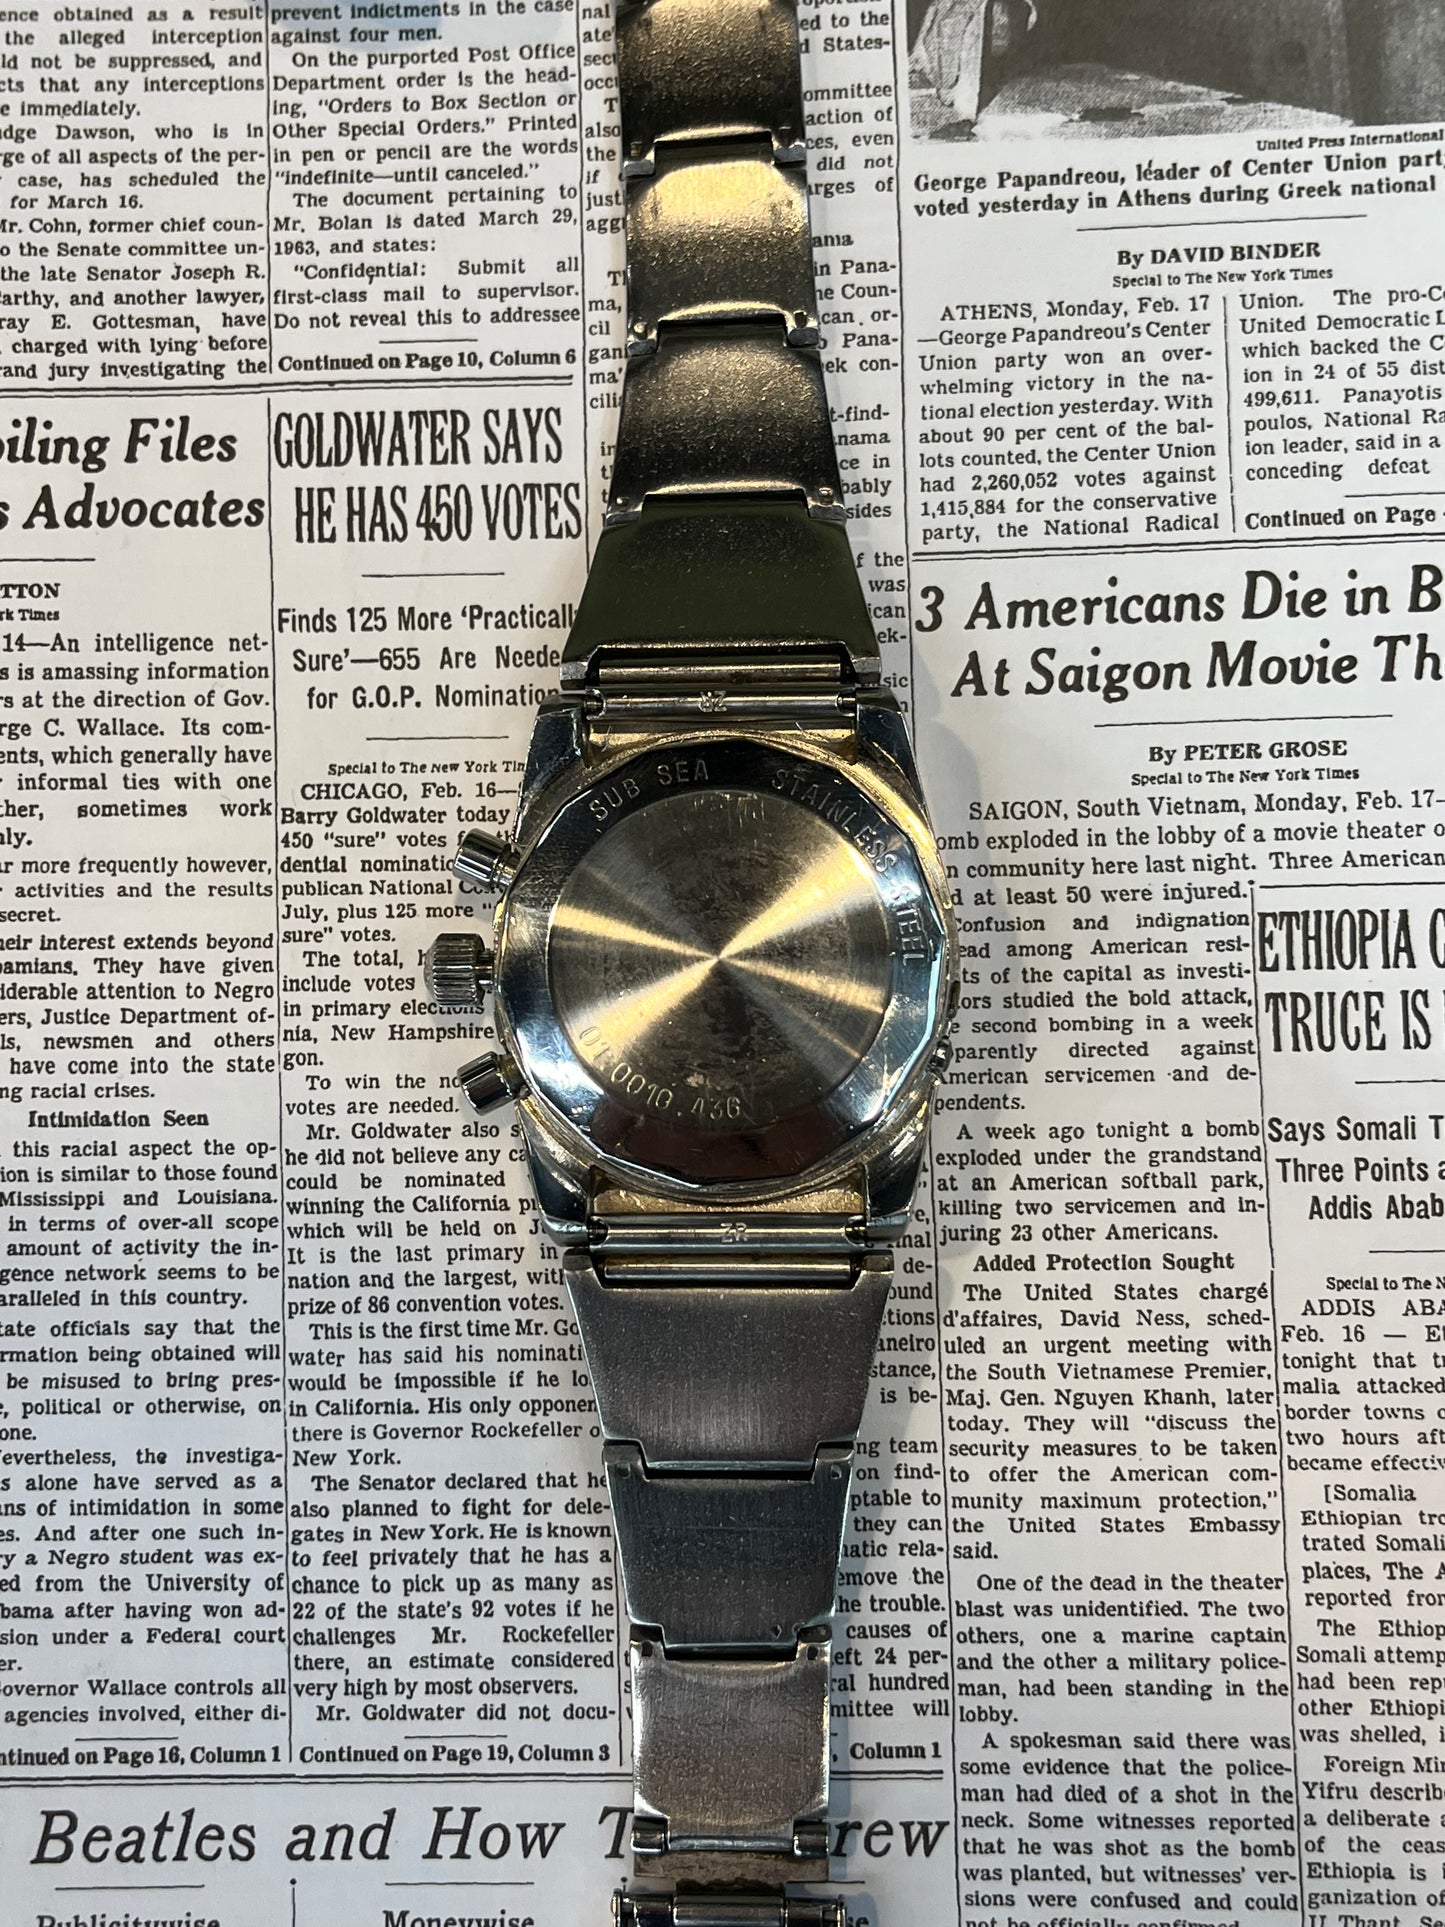 Movado Astronic HS 360